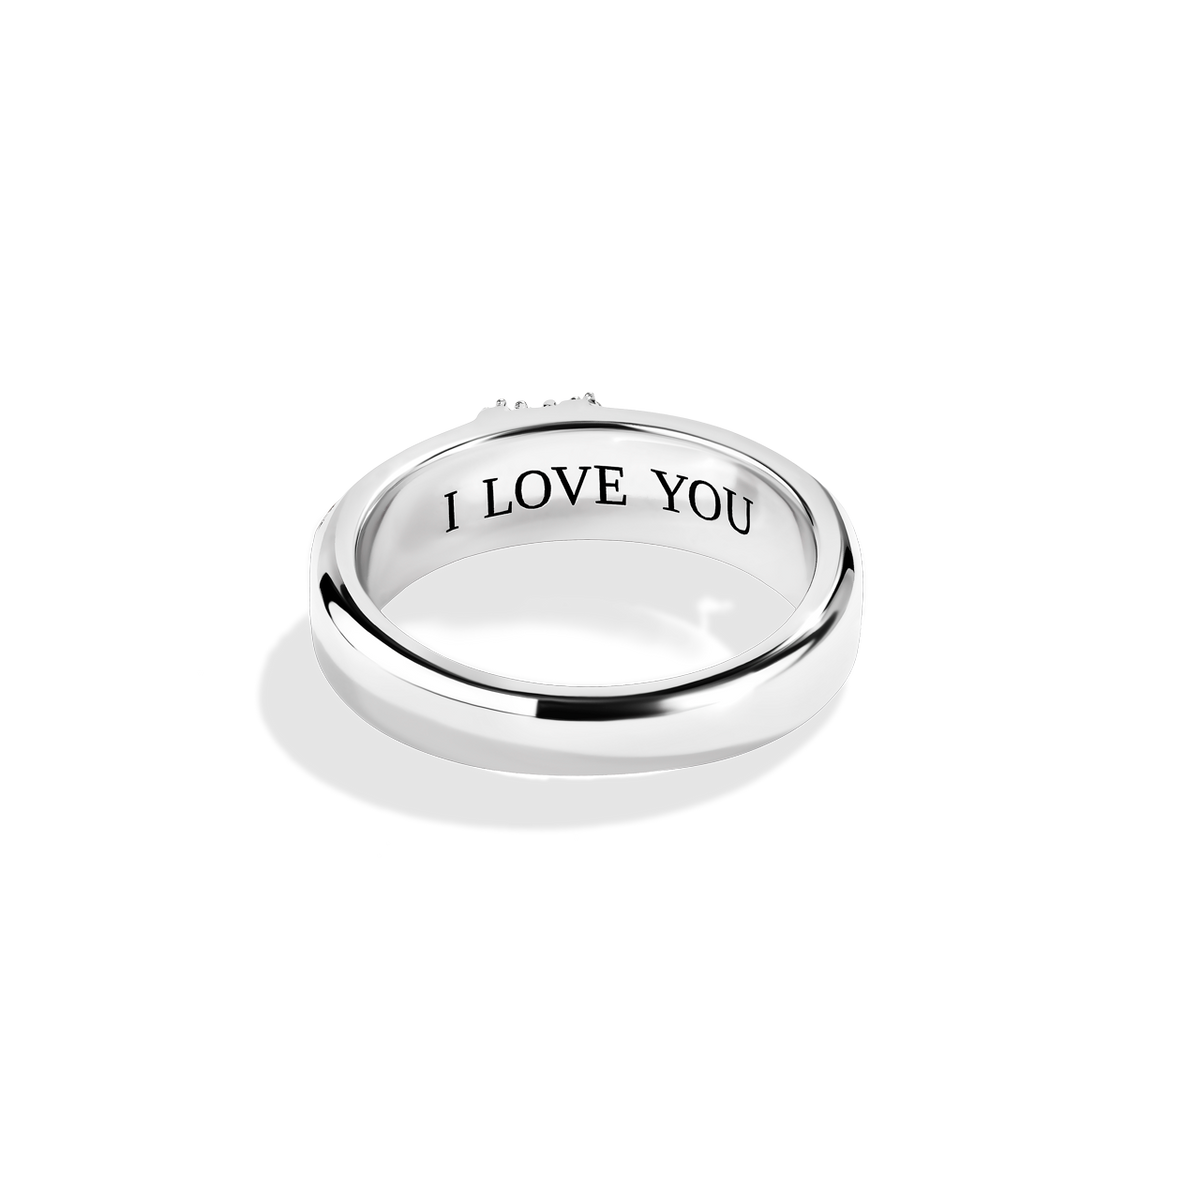 Tiffany & Co Sterling Silver I LOVE YOU Band Ring Size 4.75 – QUEEN MAY